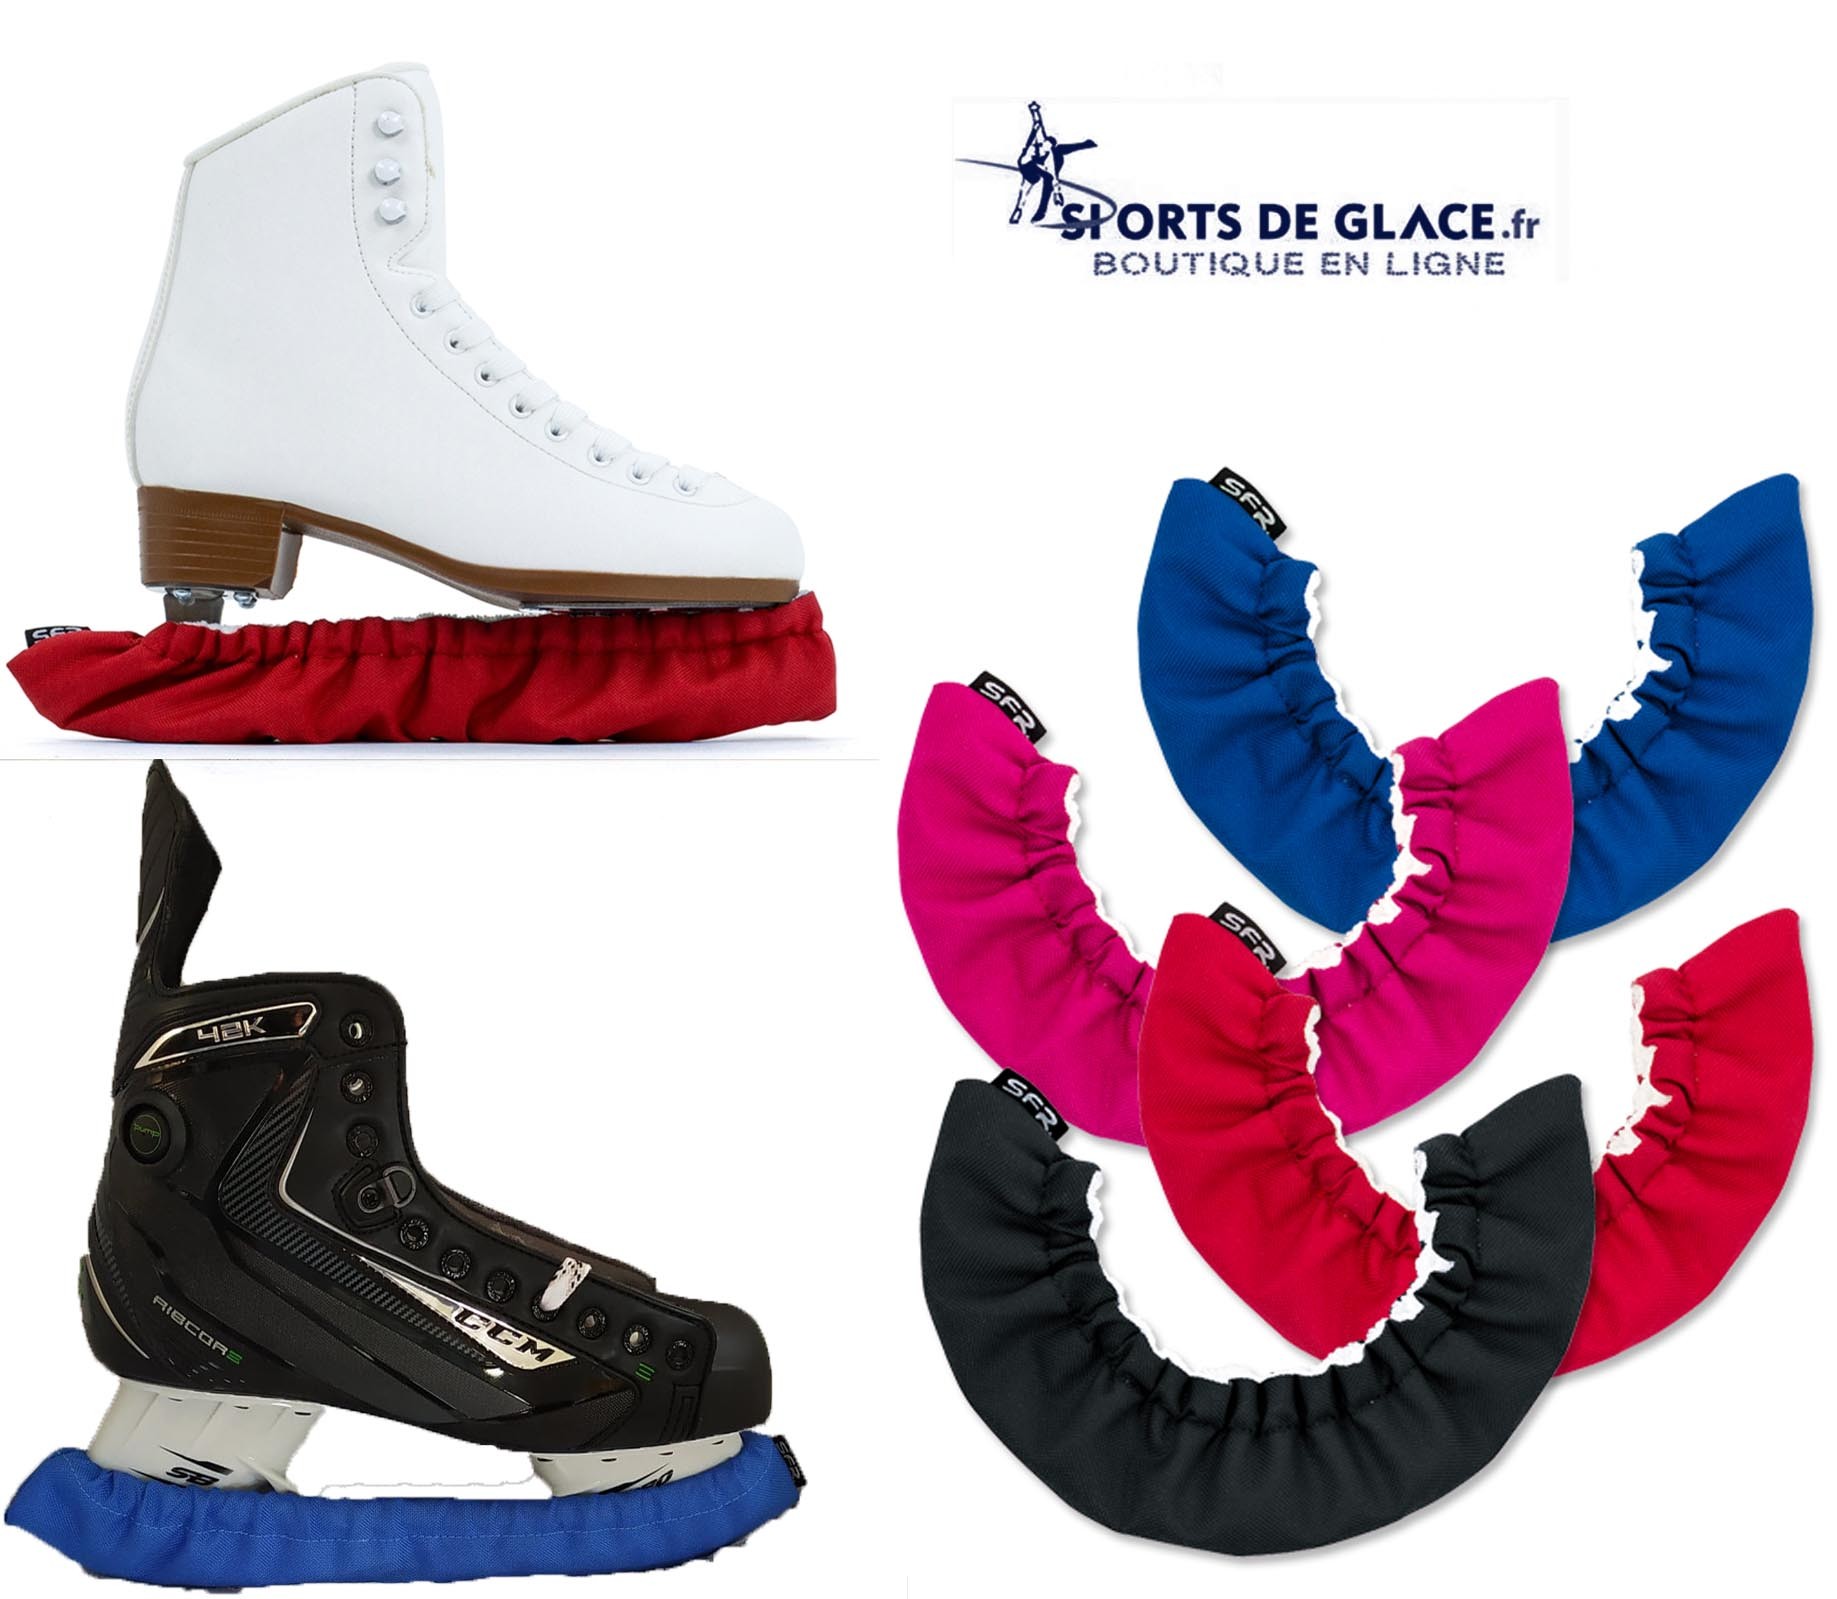 basic Blade covers - SPORTS DE GLACE France